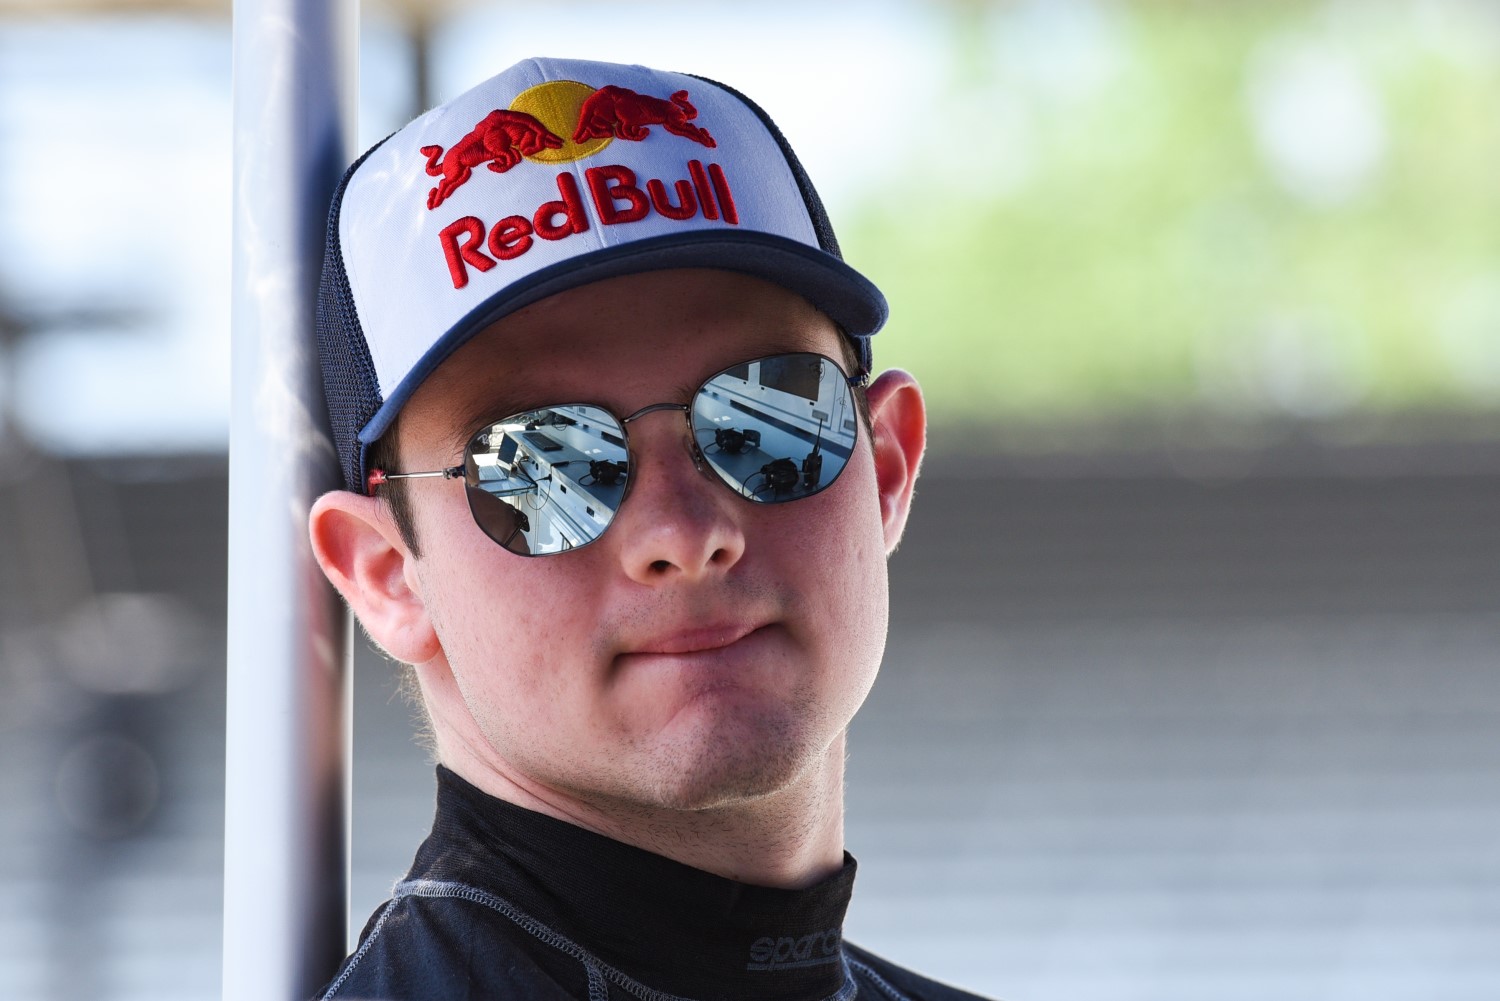 If O'Ward shines in Japan, he might get a shot at a Toro Rosso seat